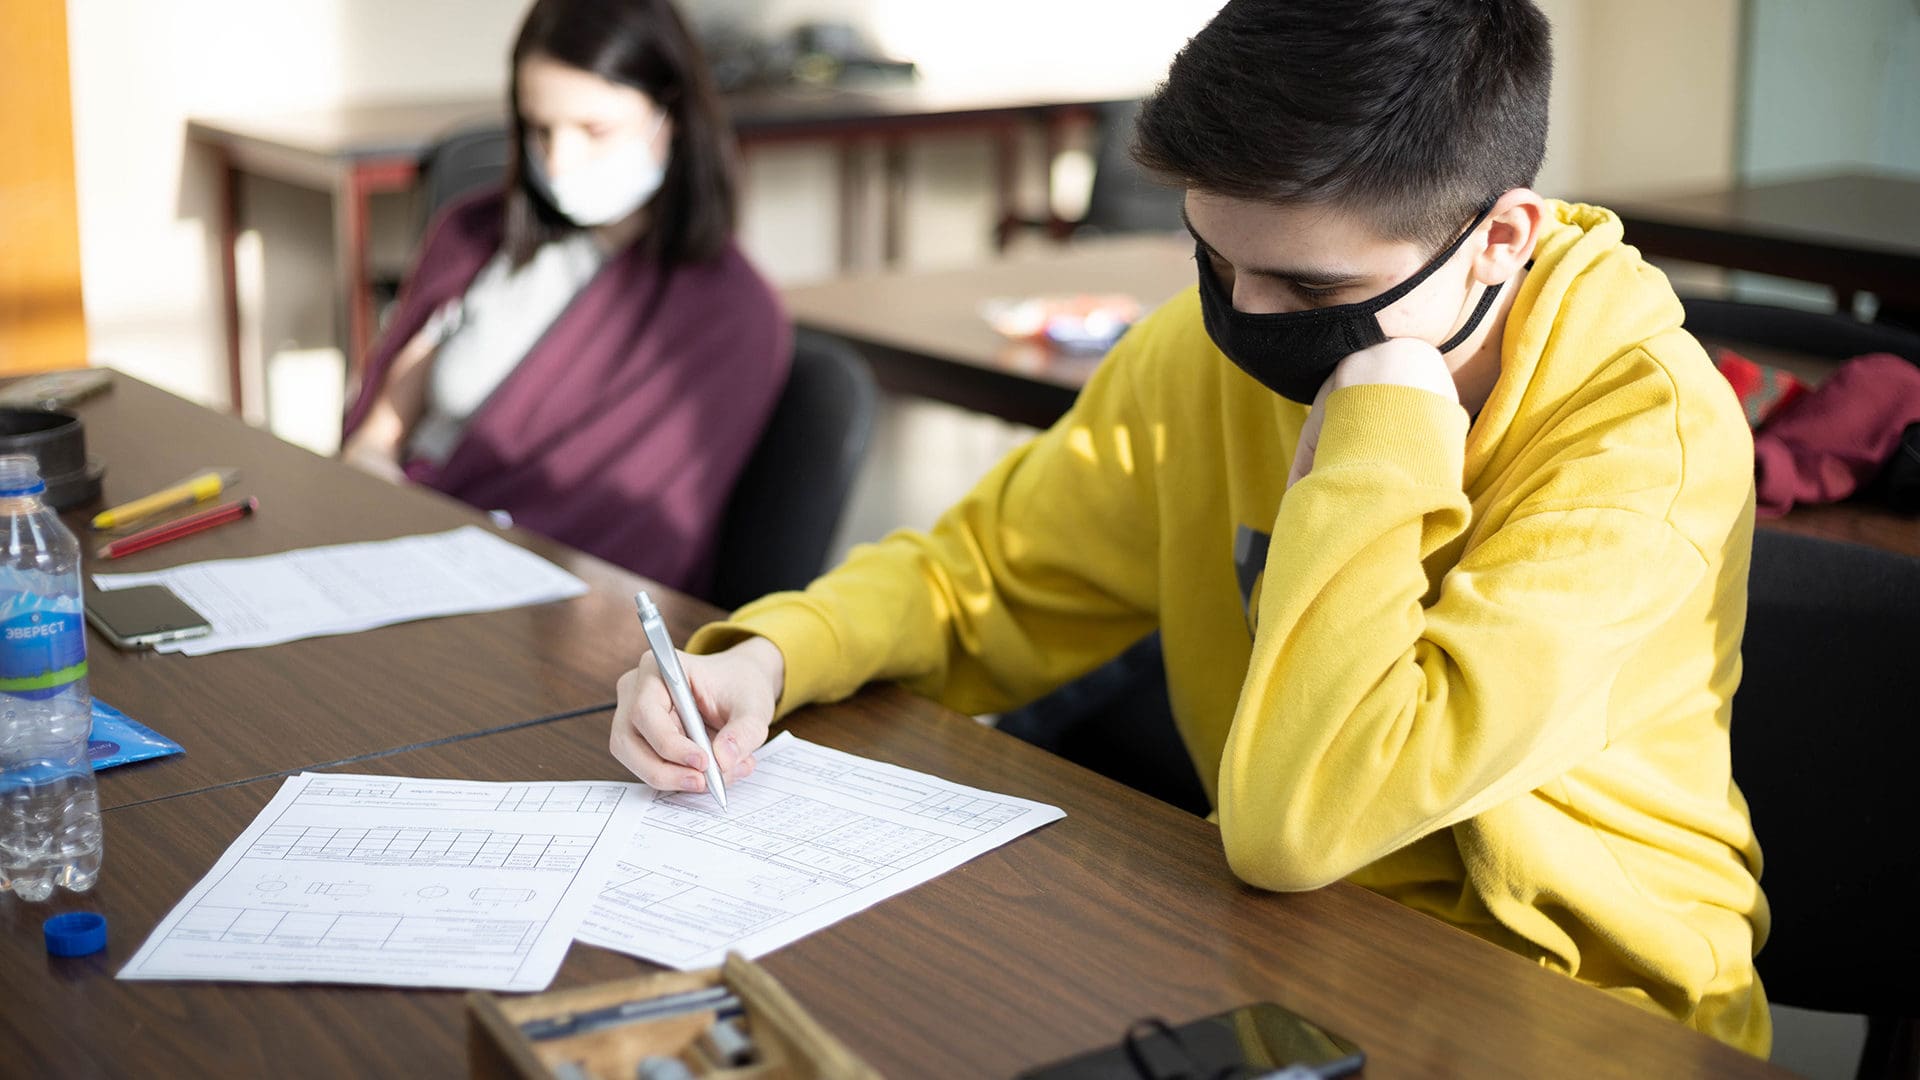 Students working wearing masks